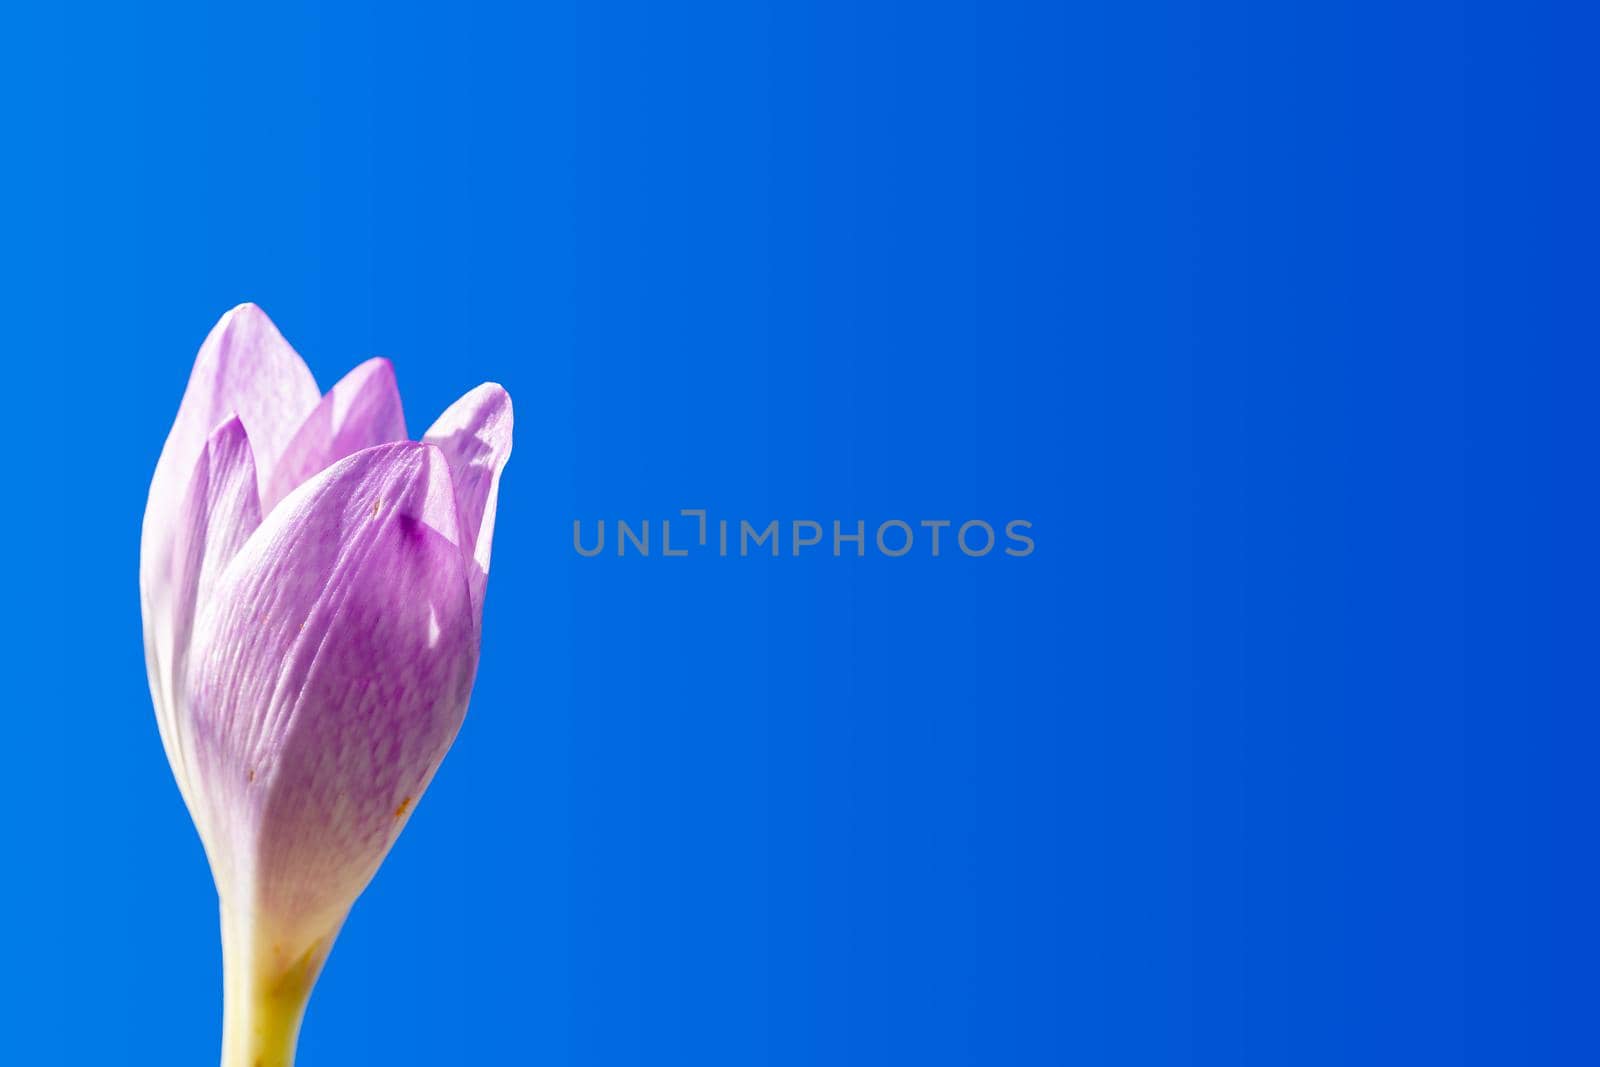 A beautiful crocus flower bud is blooming against a blue sky background. Copy space.